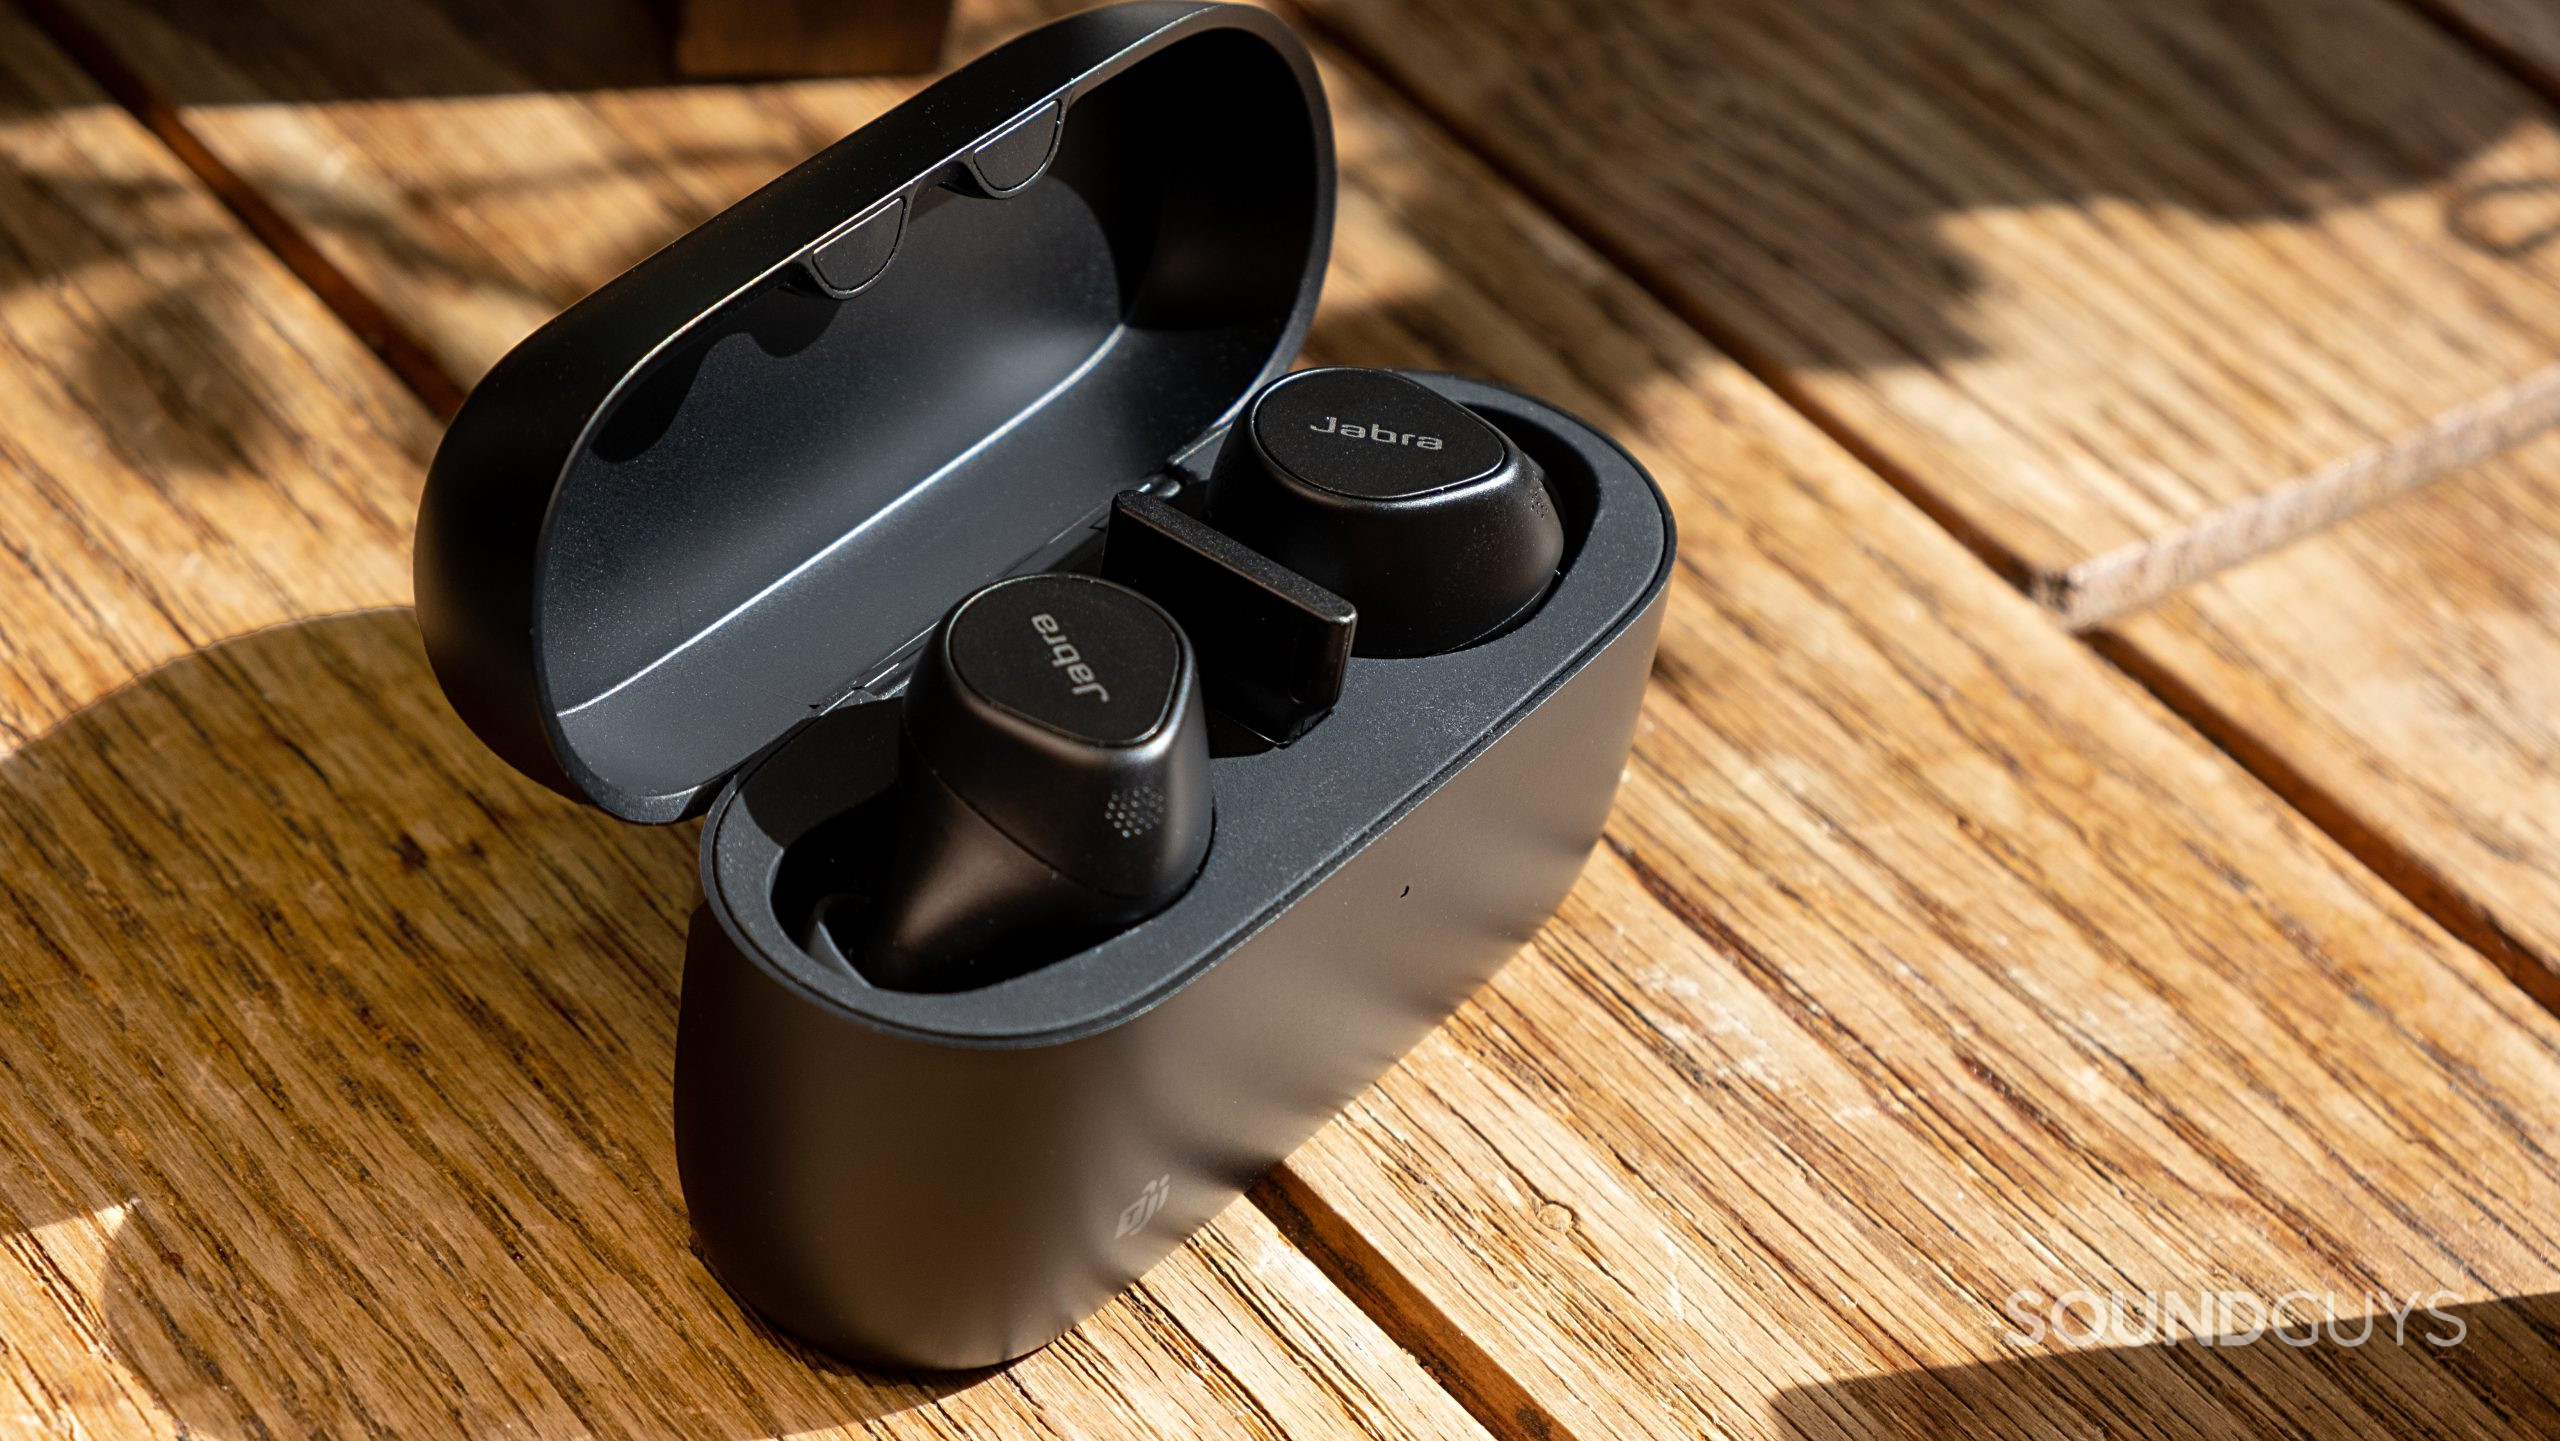 On a wood surface the Jabra Evolve2 Buds are seated in the case with the lid open showing the buds and dongle.